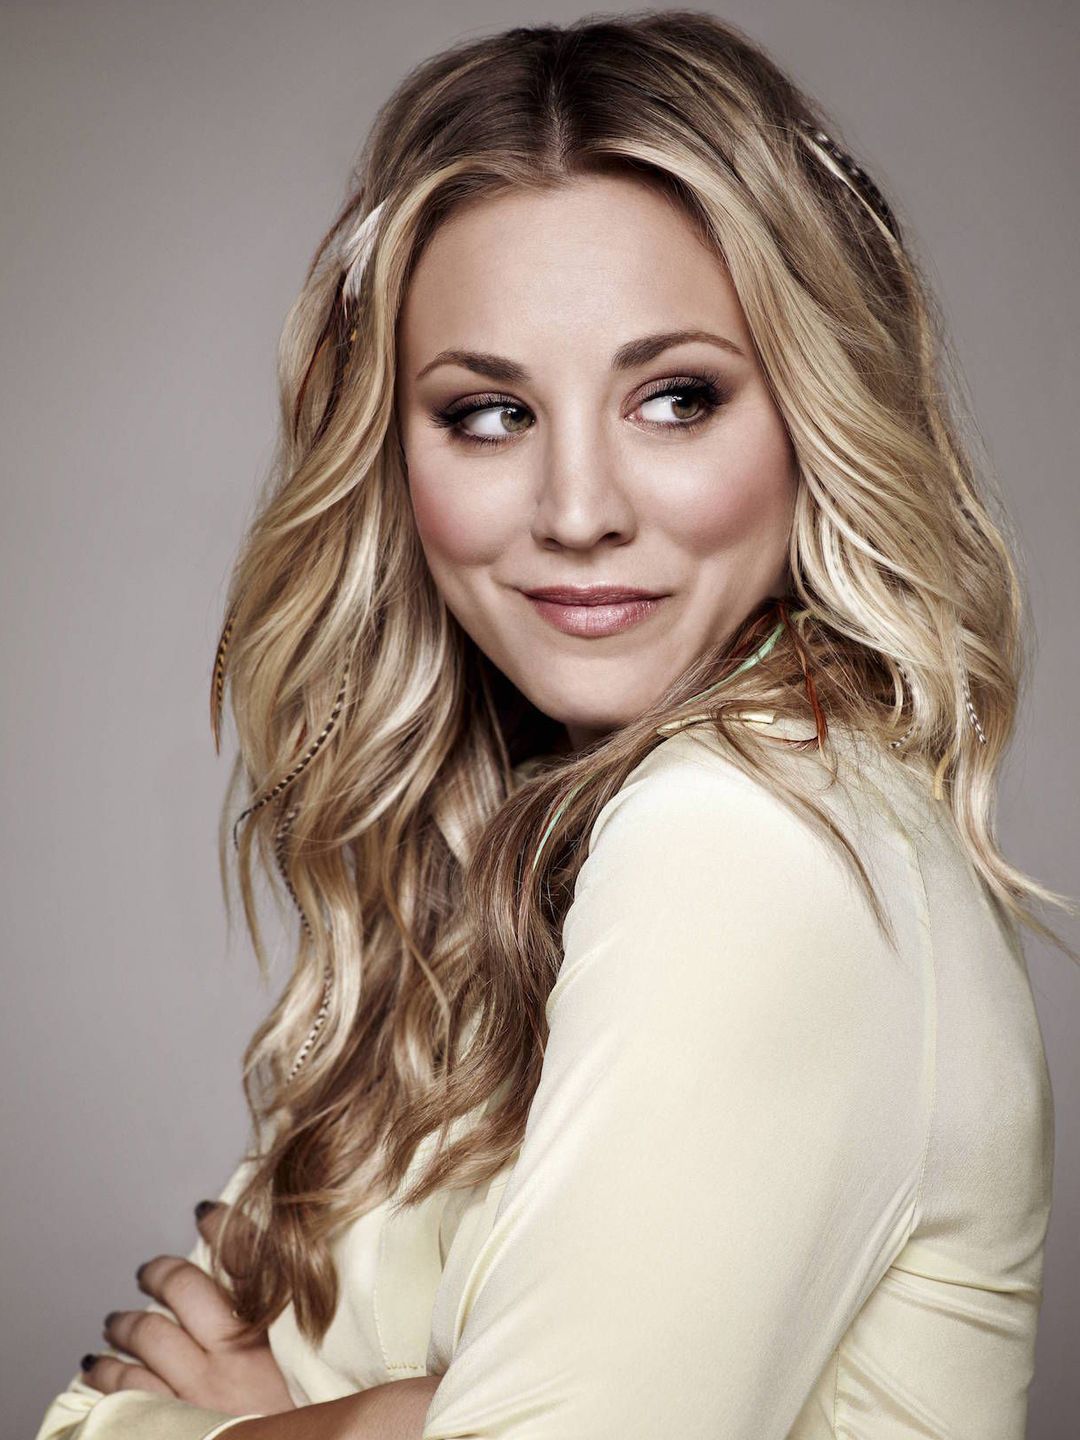 Kaley Cuoco interesting facts